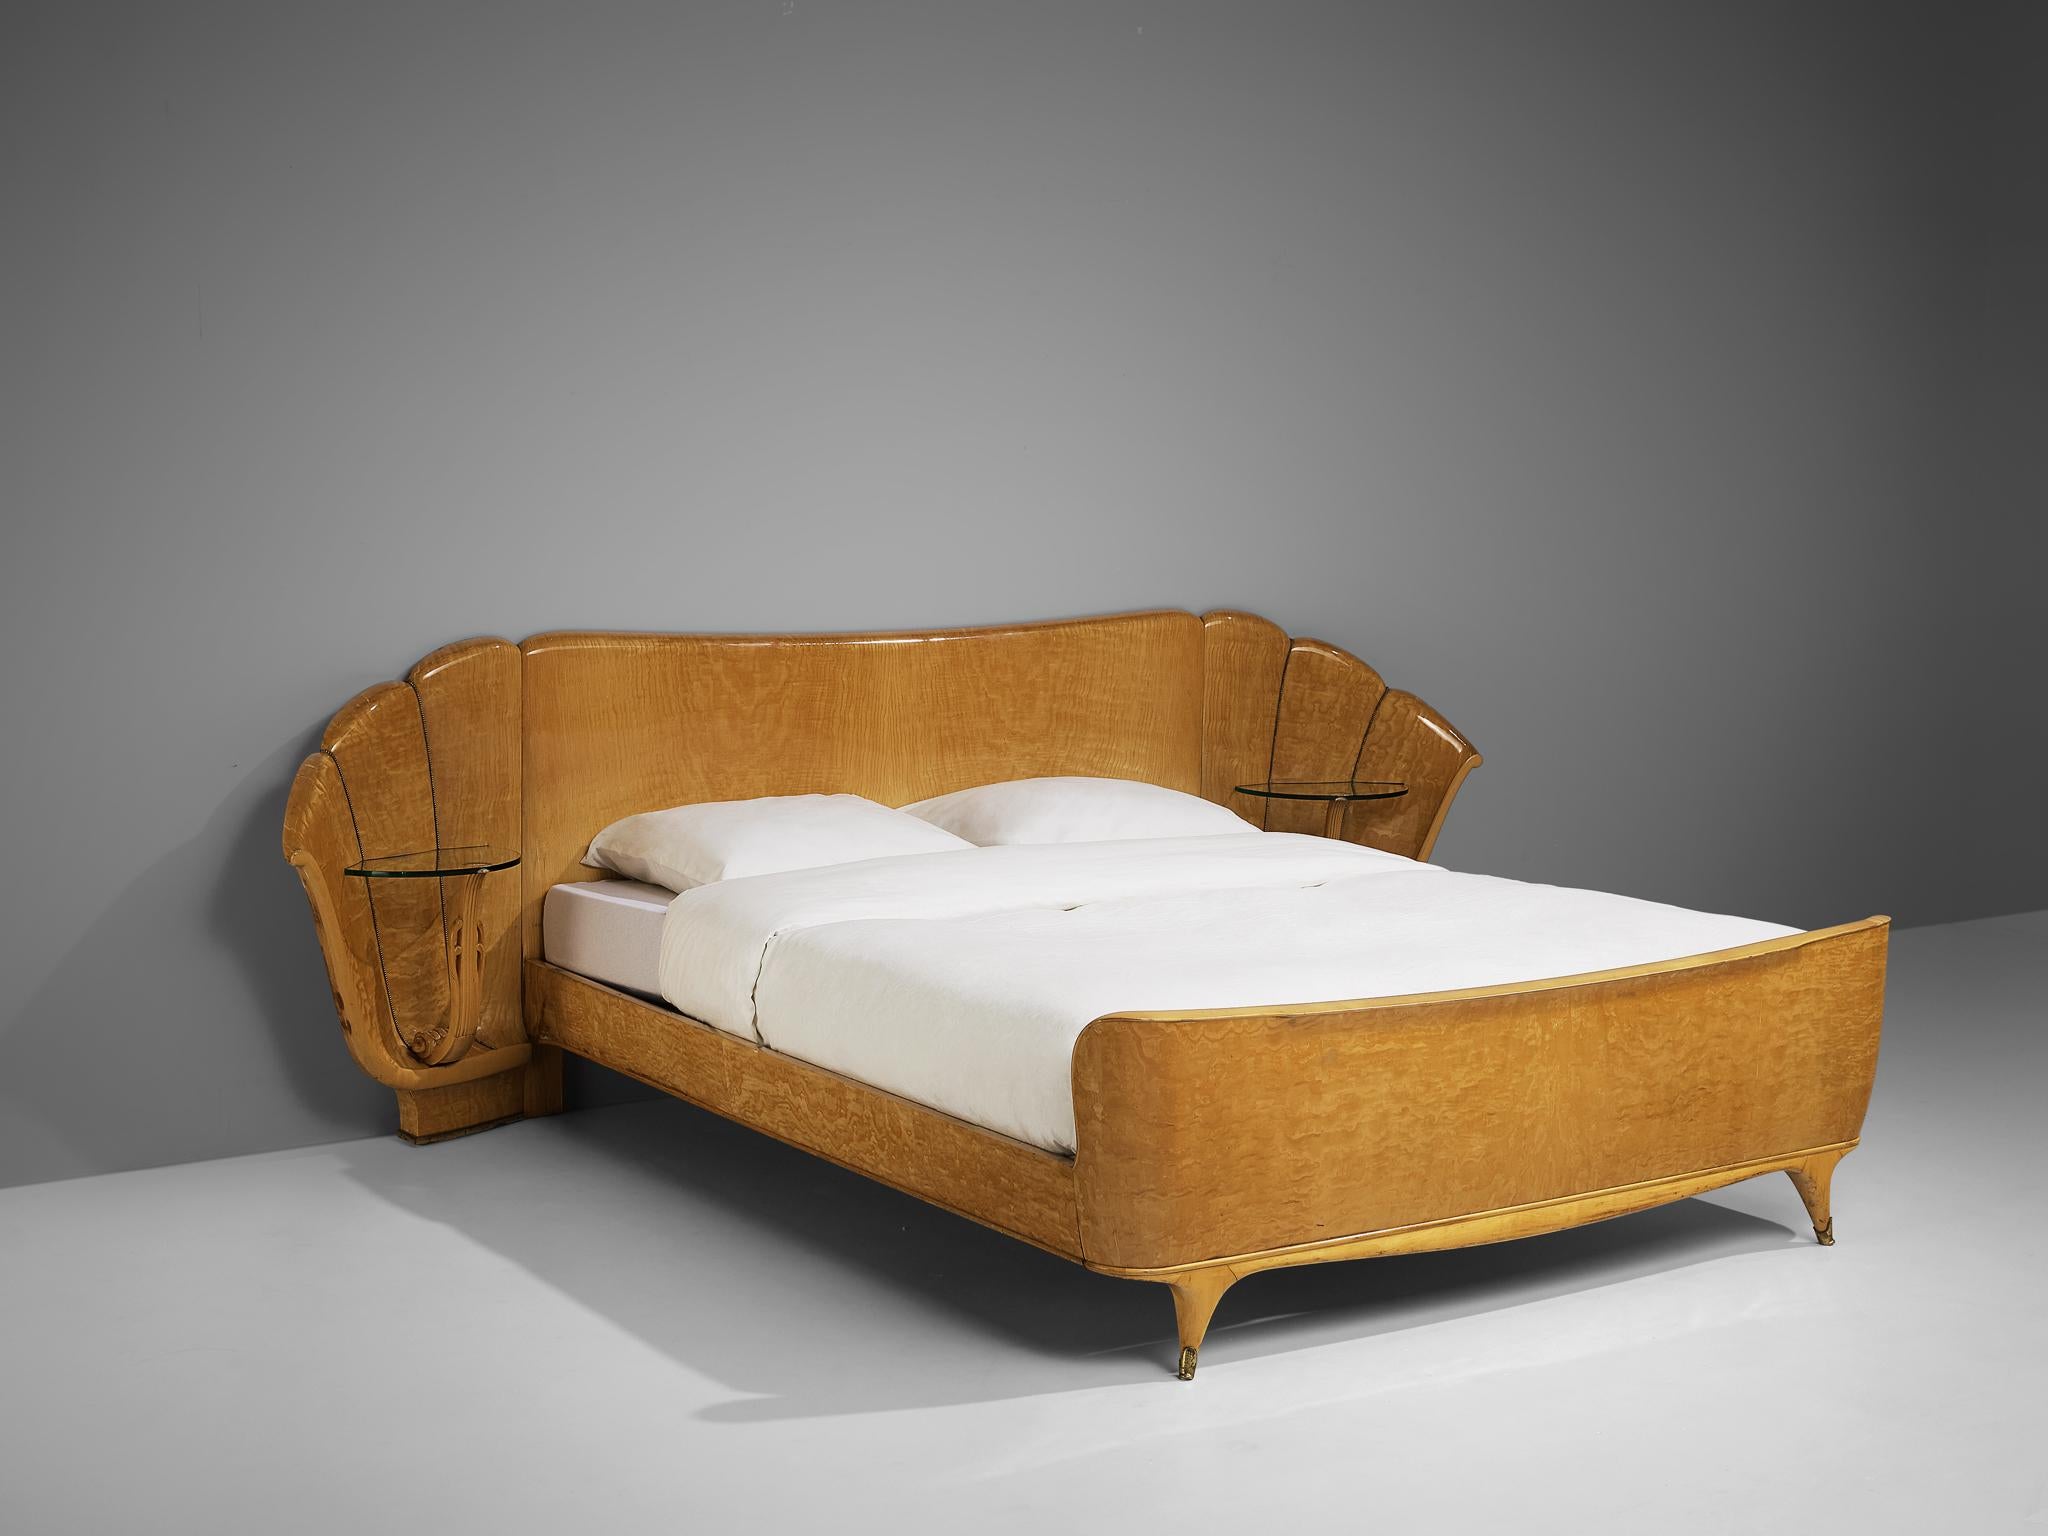 Italian double bed, ash, glass, Italy, 1950s

Double bed with two integrated side tables. The shape of the headboard features a dynamic design with slightly curved sides and shell-like design. Vertical lines with little brass nails structure the